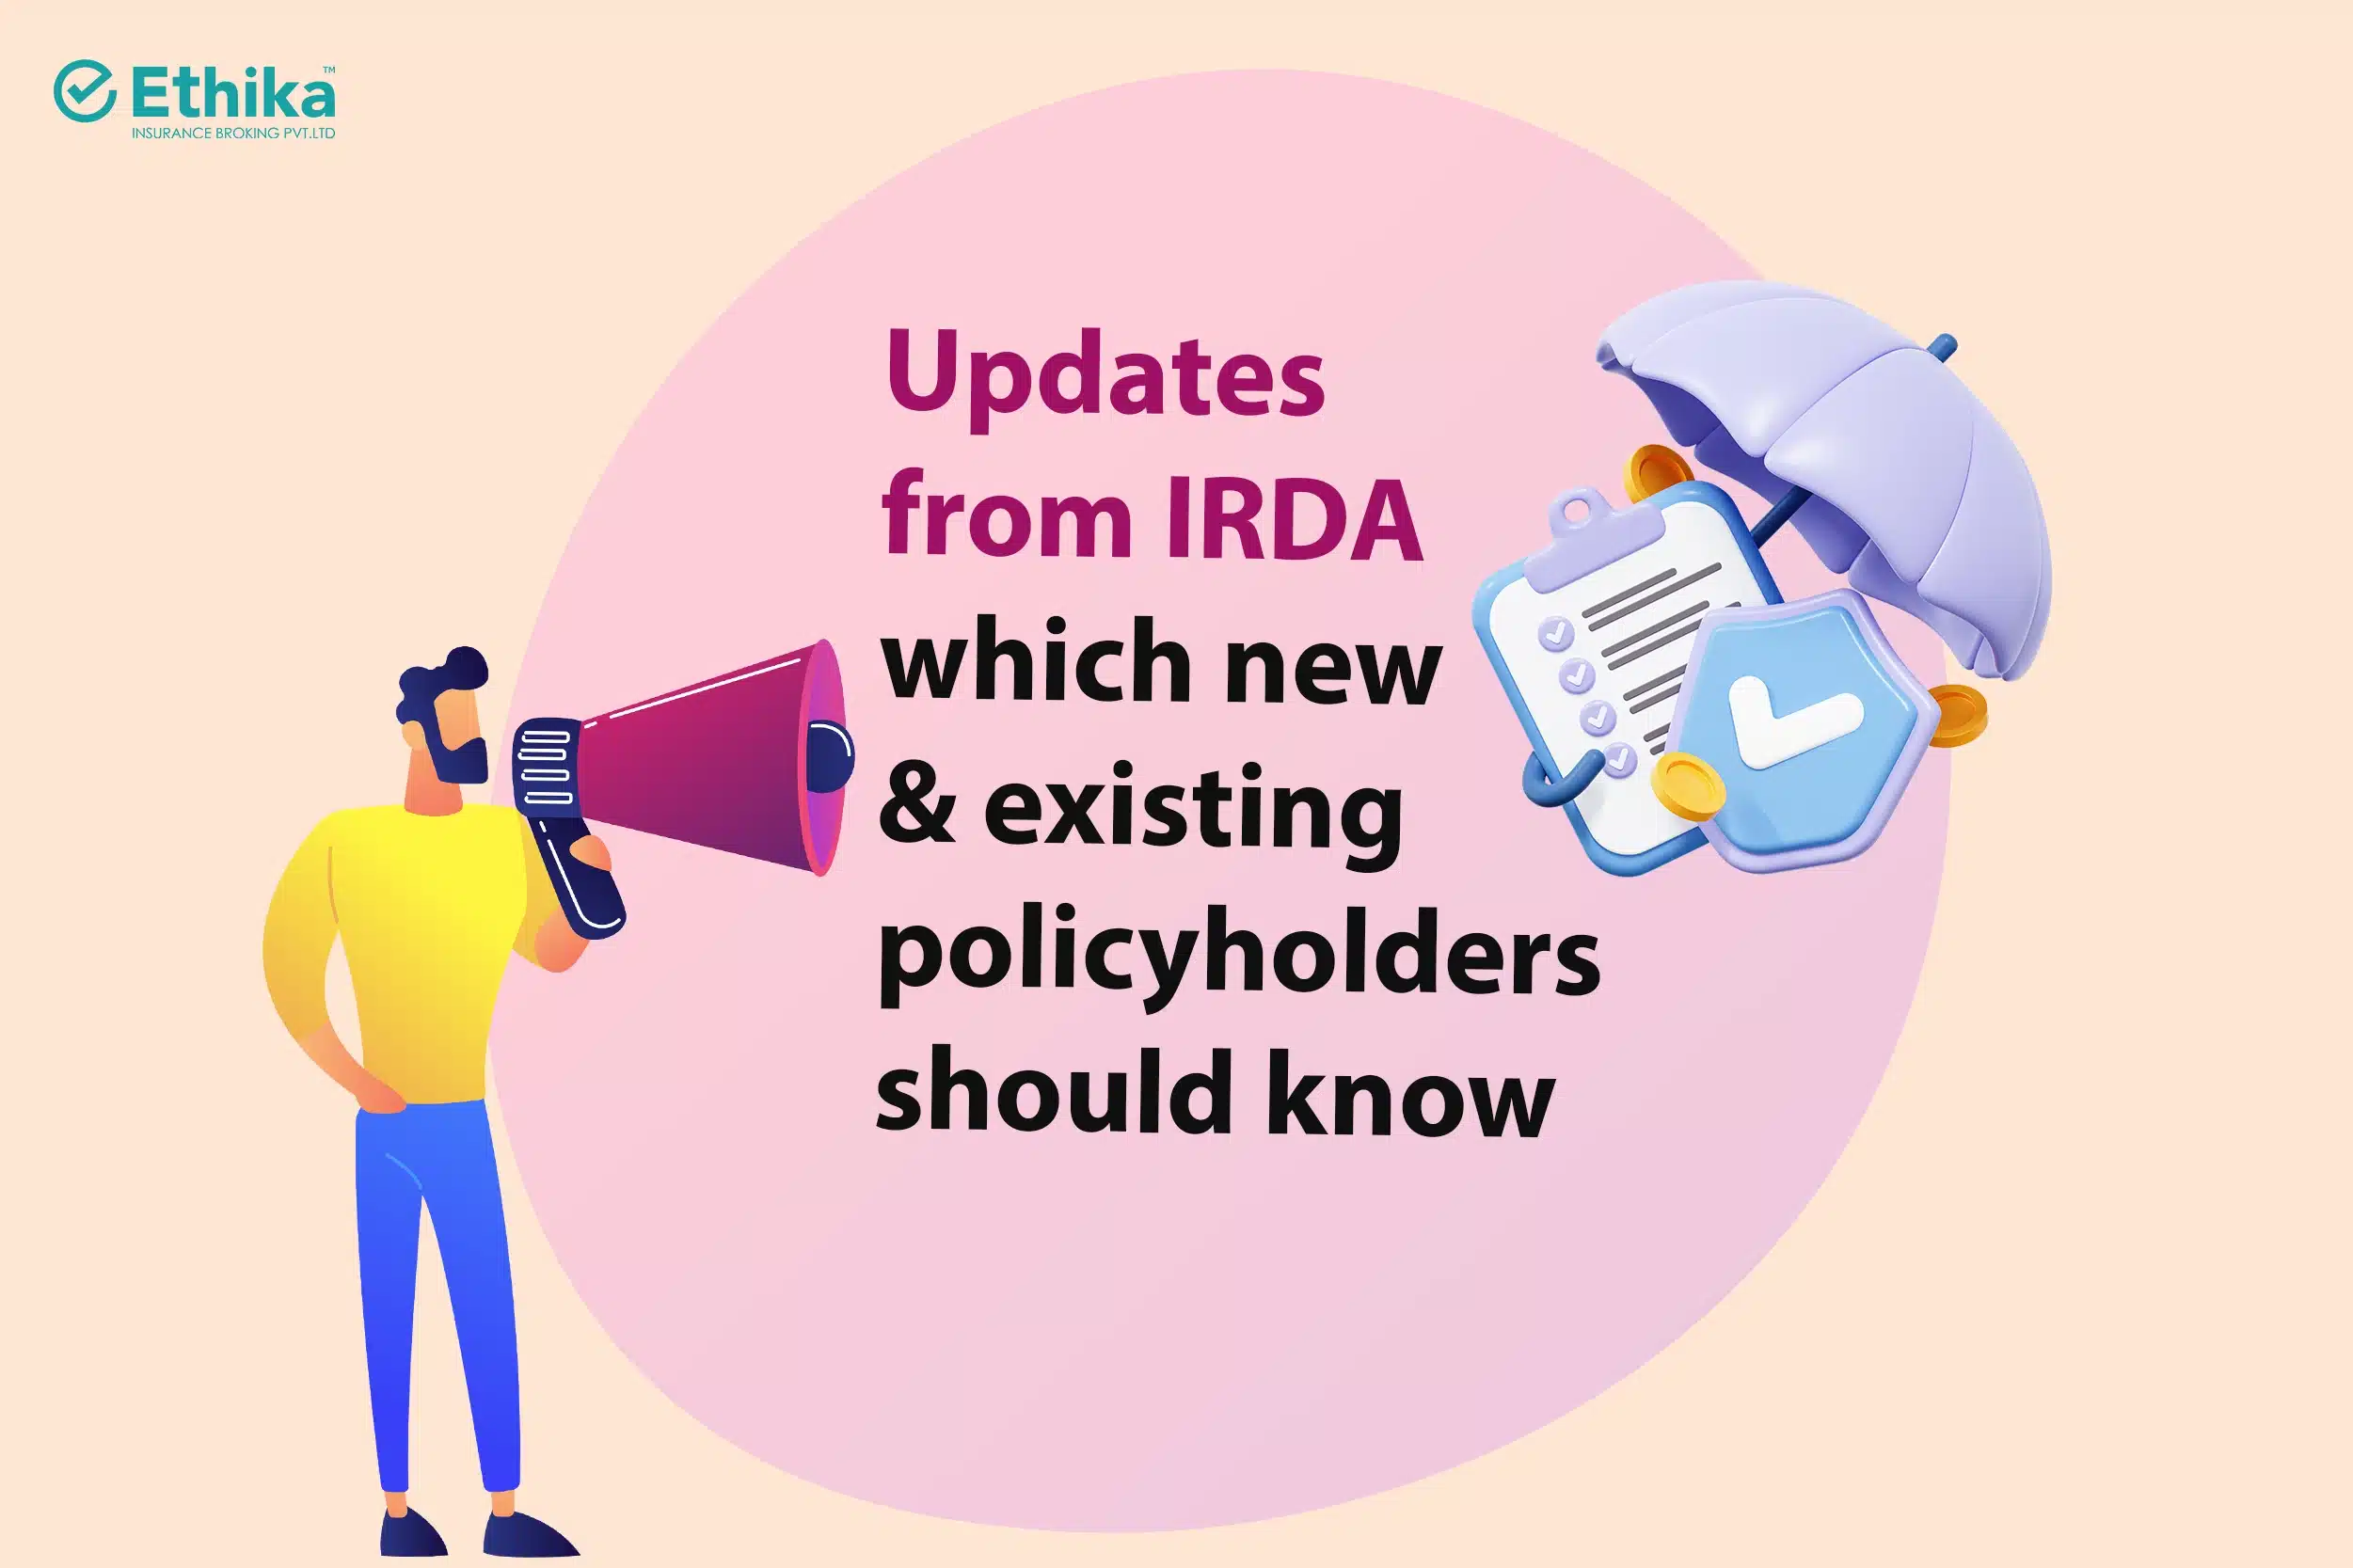 Updates-from-IRDA-which-new-and-existing-policyholders-should-know-copy